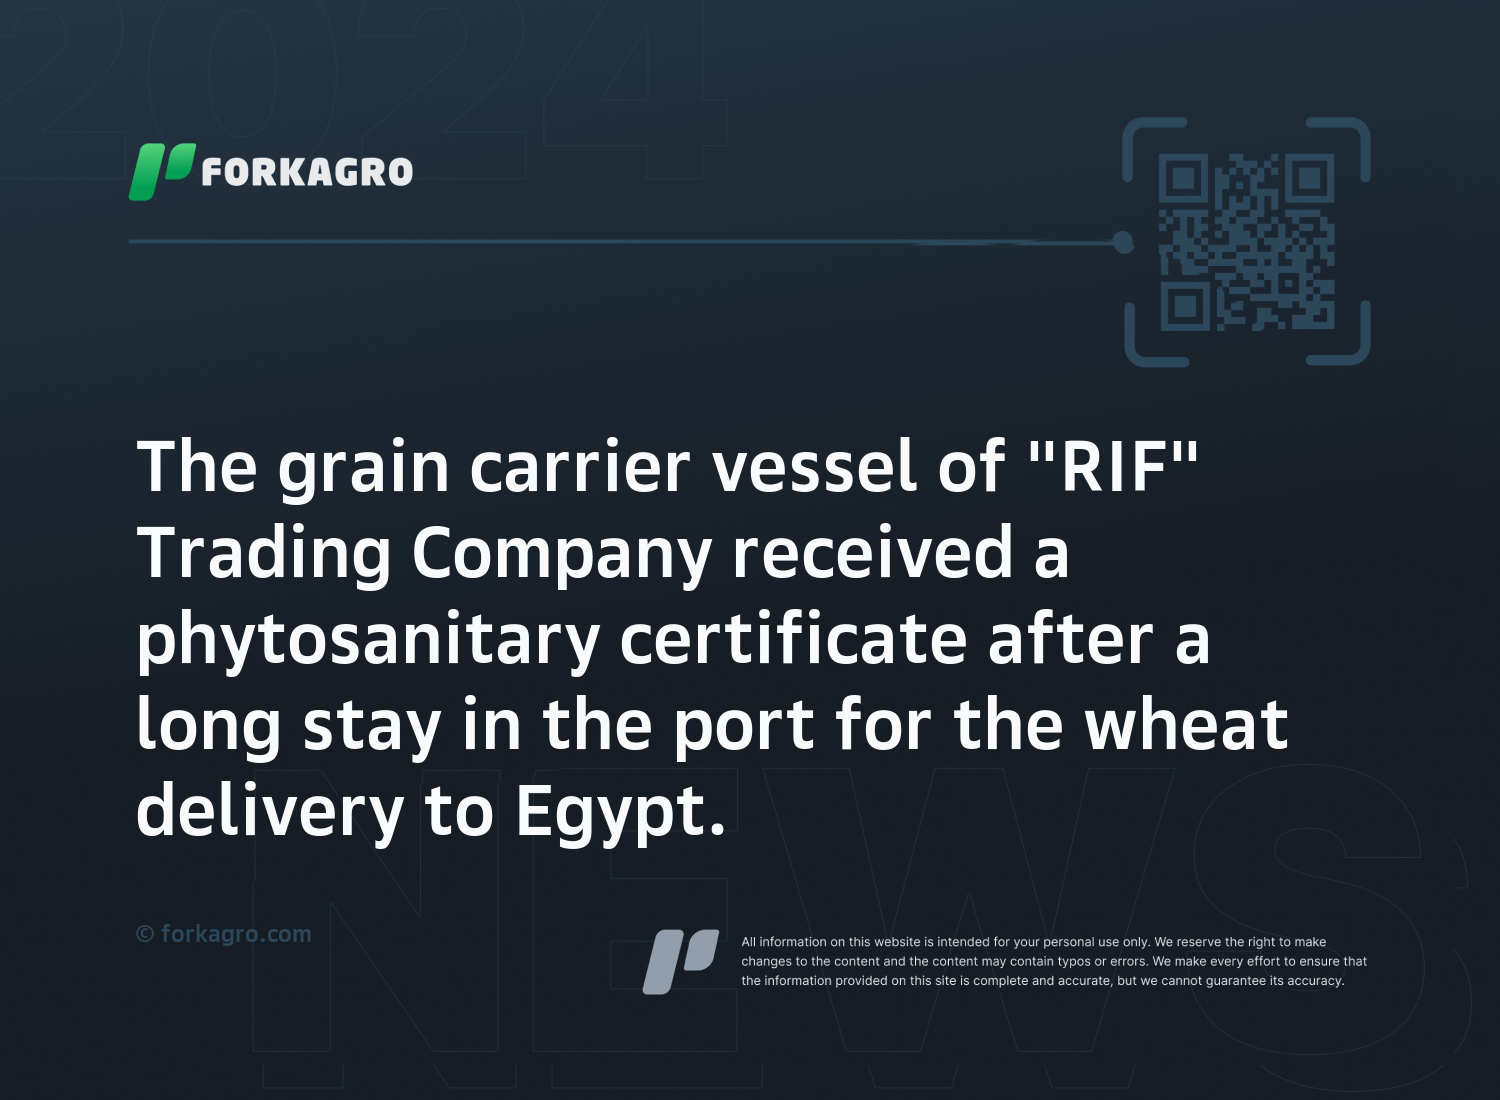 The grain carrier vessel of "RIF" Trading Company received a phytosanitary certificate after a long stay in the port for the wheat delivery to Egypt.